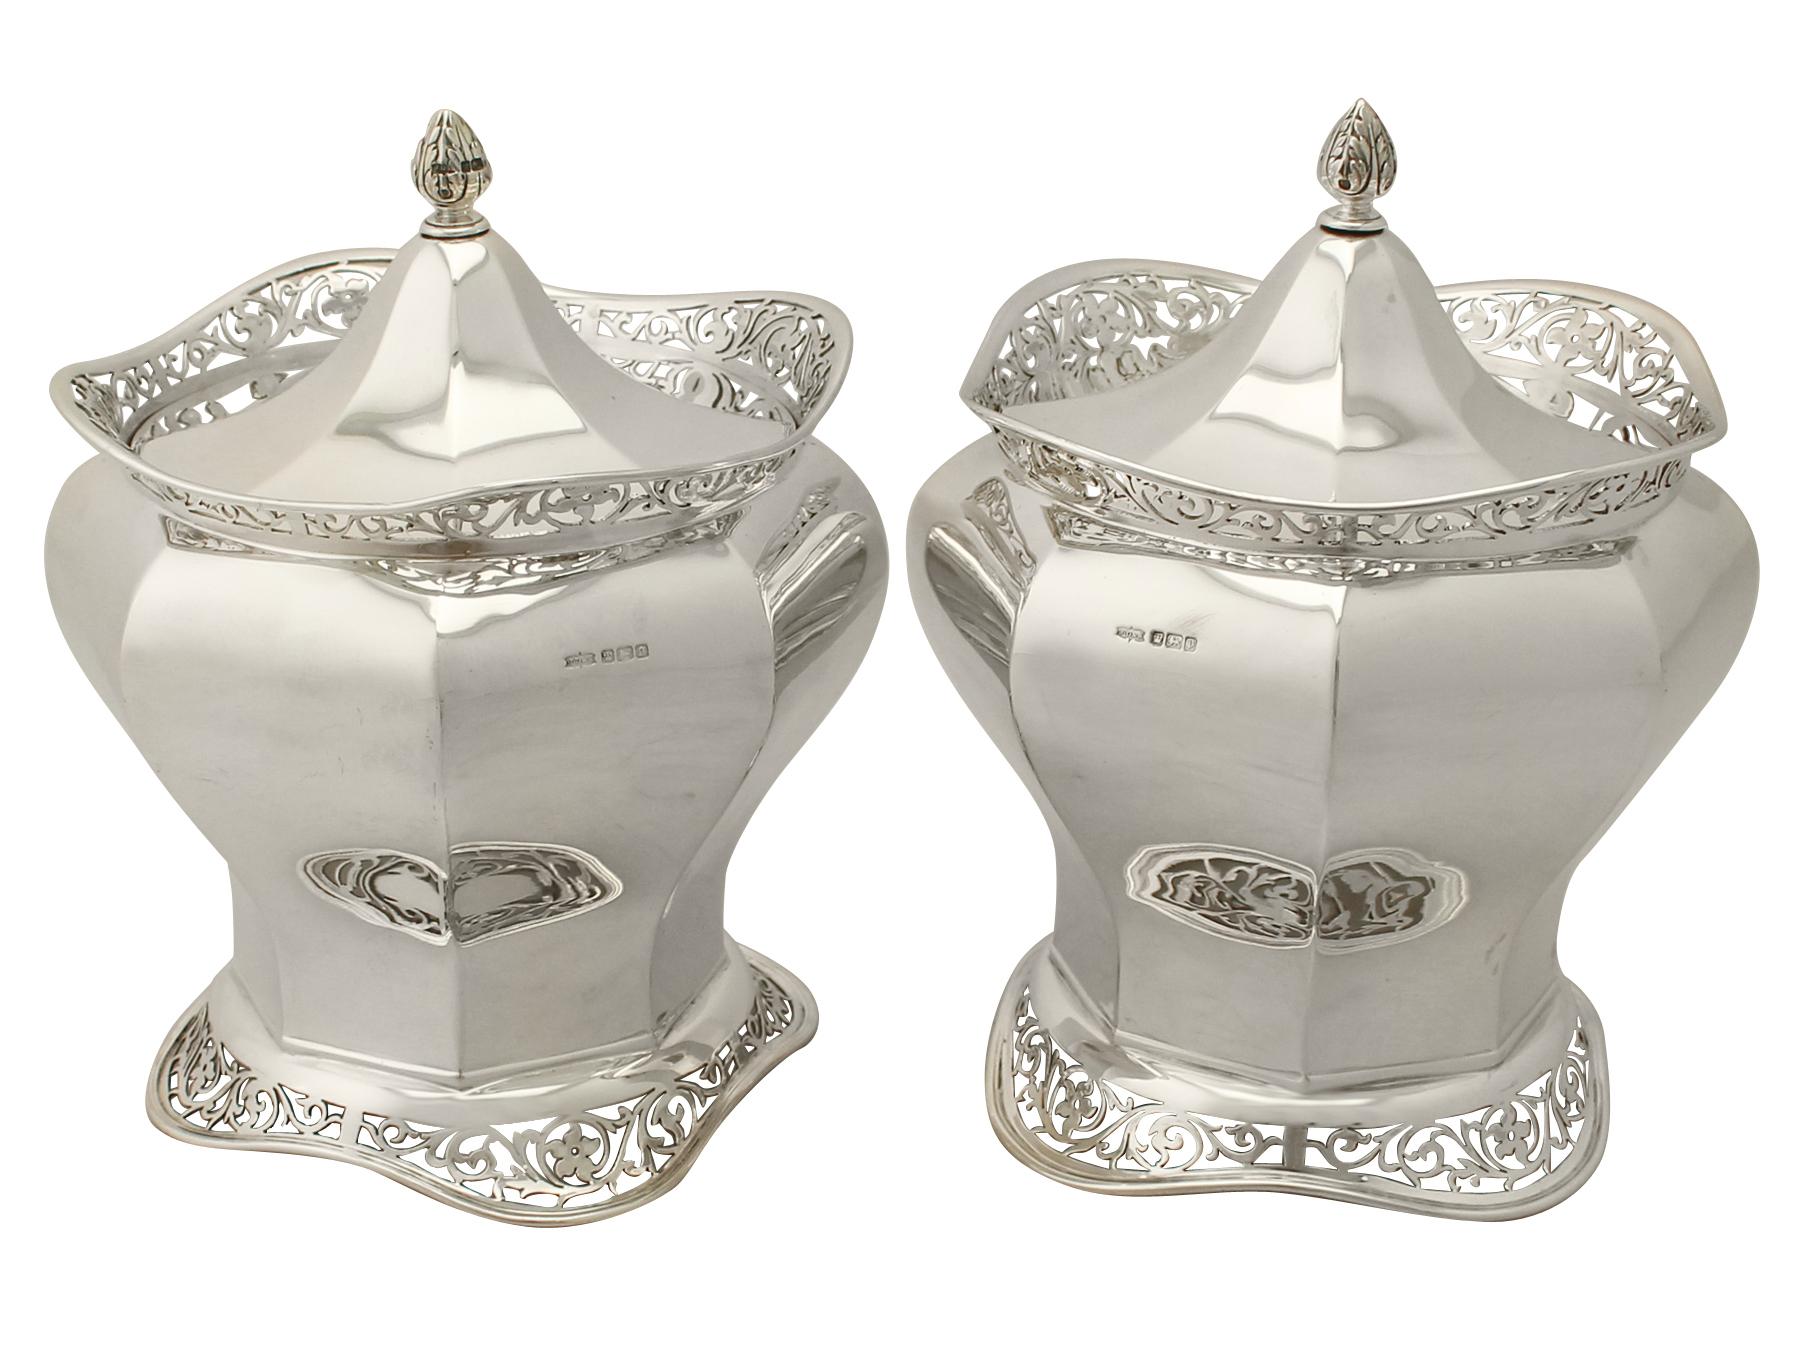 An exceptional, fine and impressive pair of antique Edwardian English sterling silver biscuit boxes; an addition to our silver teaware collection.

These exceptional antique Edwardian sterling silver biscuit boxes have a plain hexagonal panelled